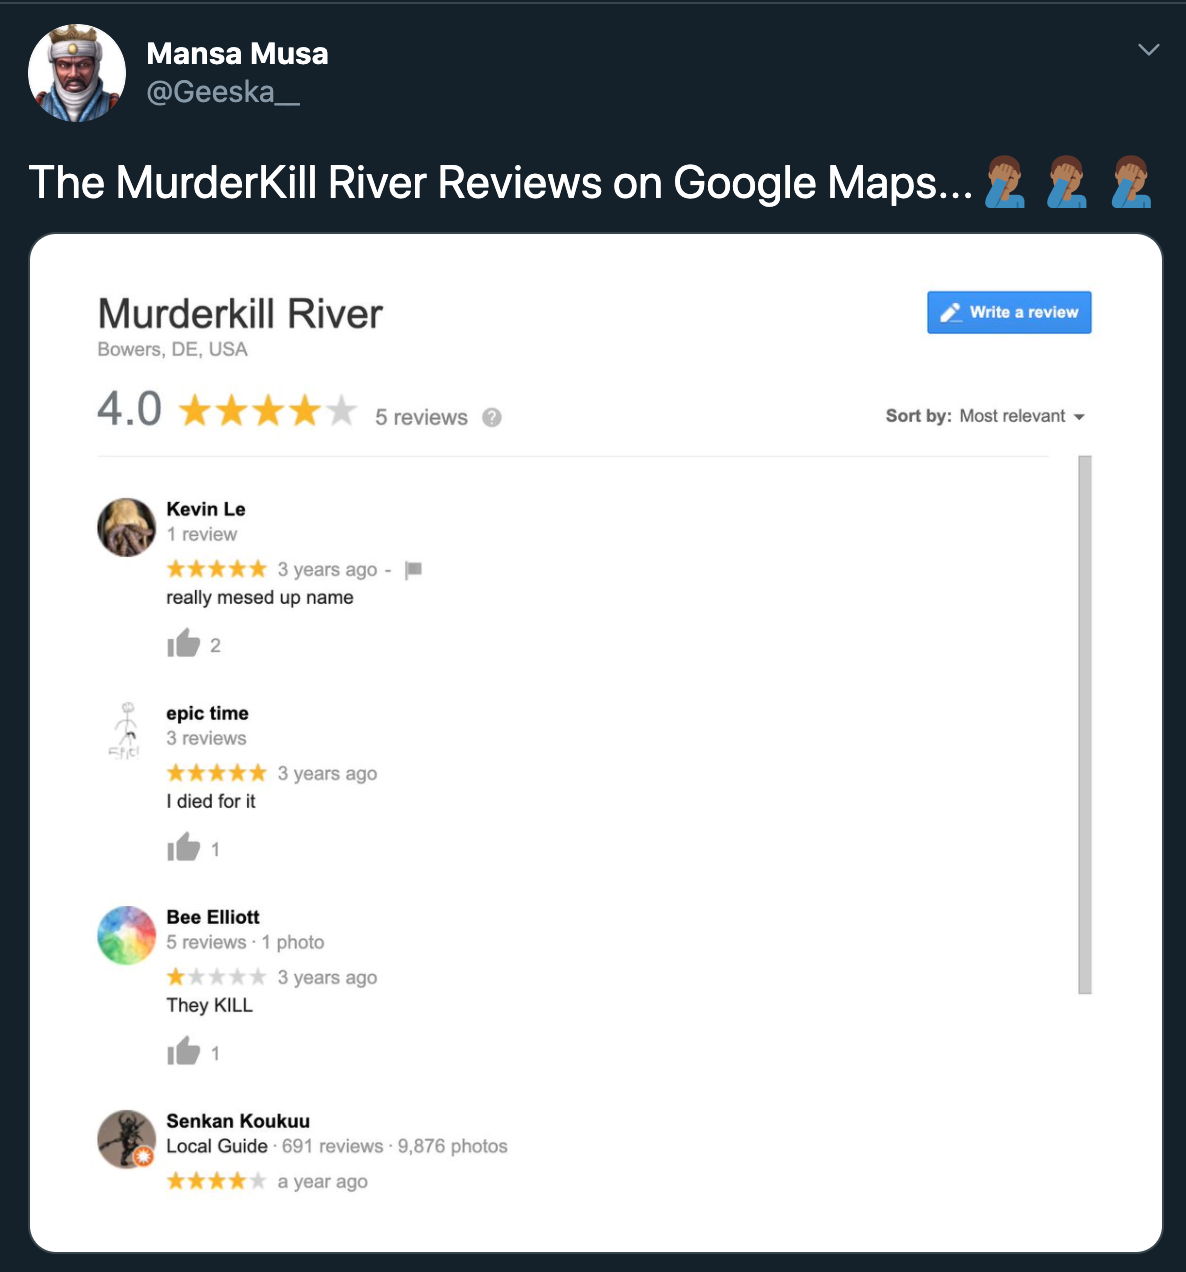 The MurderKill River Reviews on Google Maps... 2 2 2 Murderkill River Write a review Bowers, De, Usa 4.0 5 reviews Sort by Most relevant Kevin Le 1 review tttt 3 years ago really mesed up name 2. epic time 3 reviews 3 years ago I died for it 1…